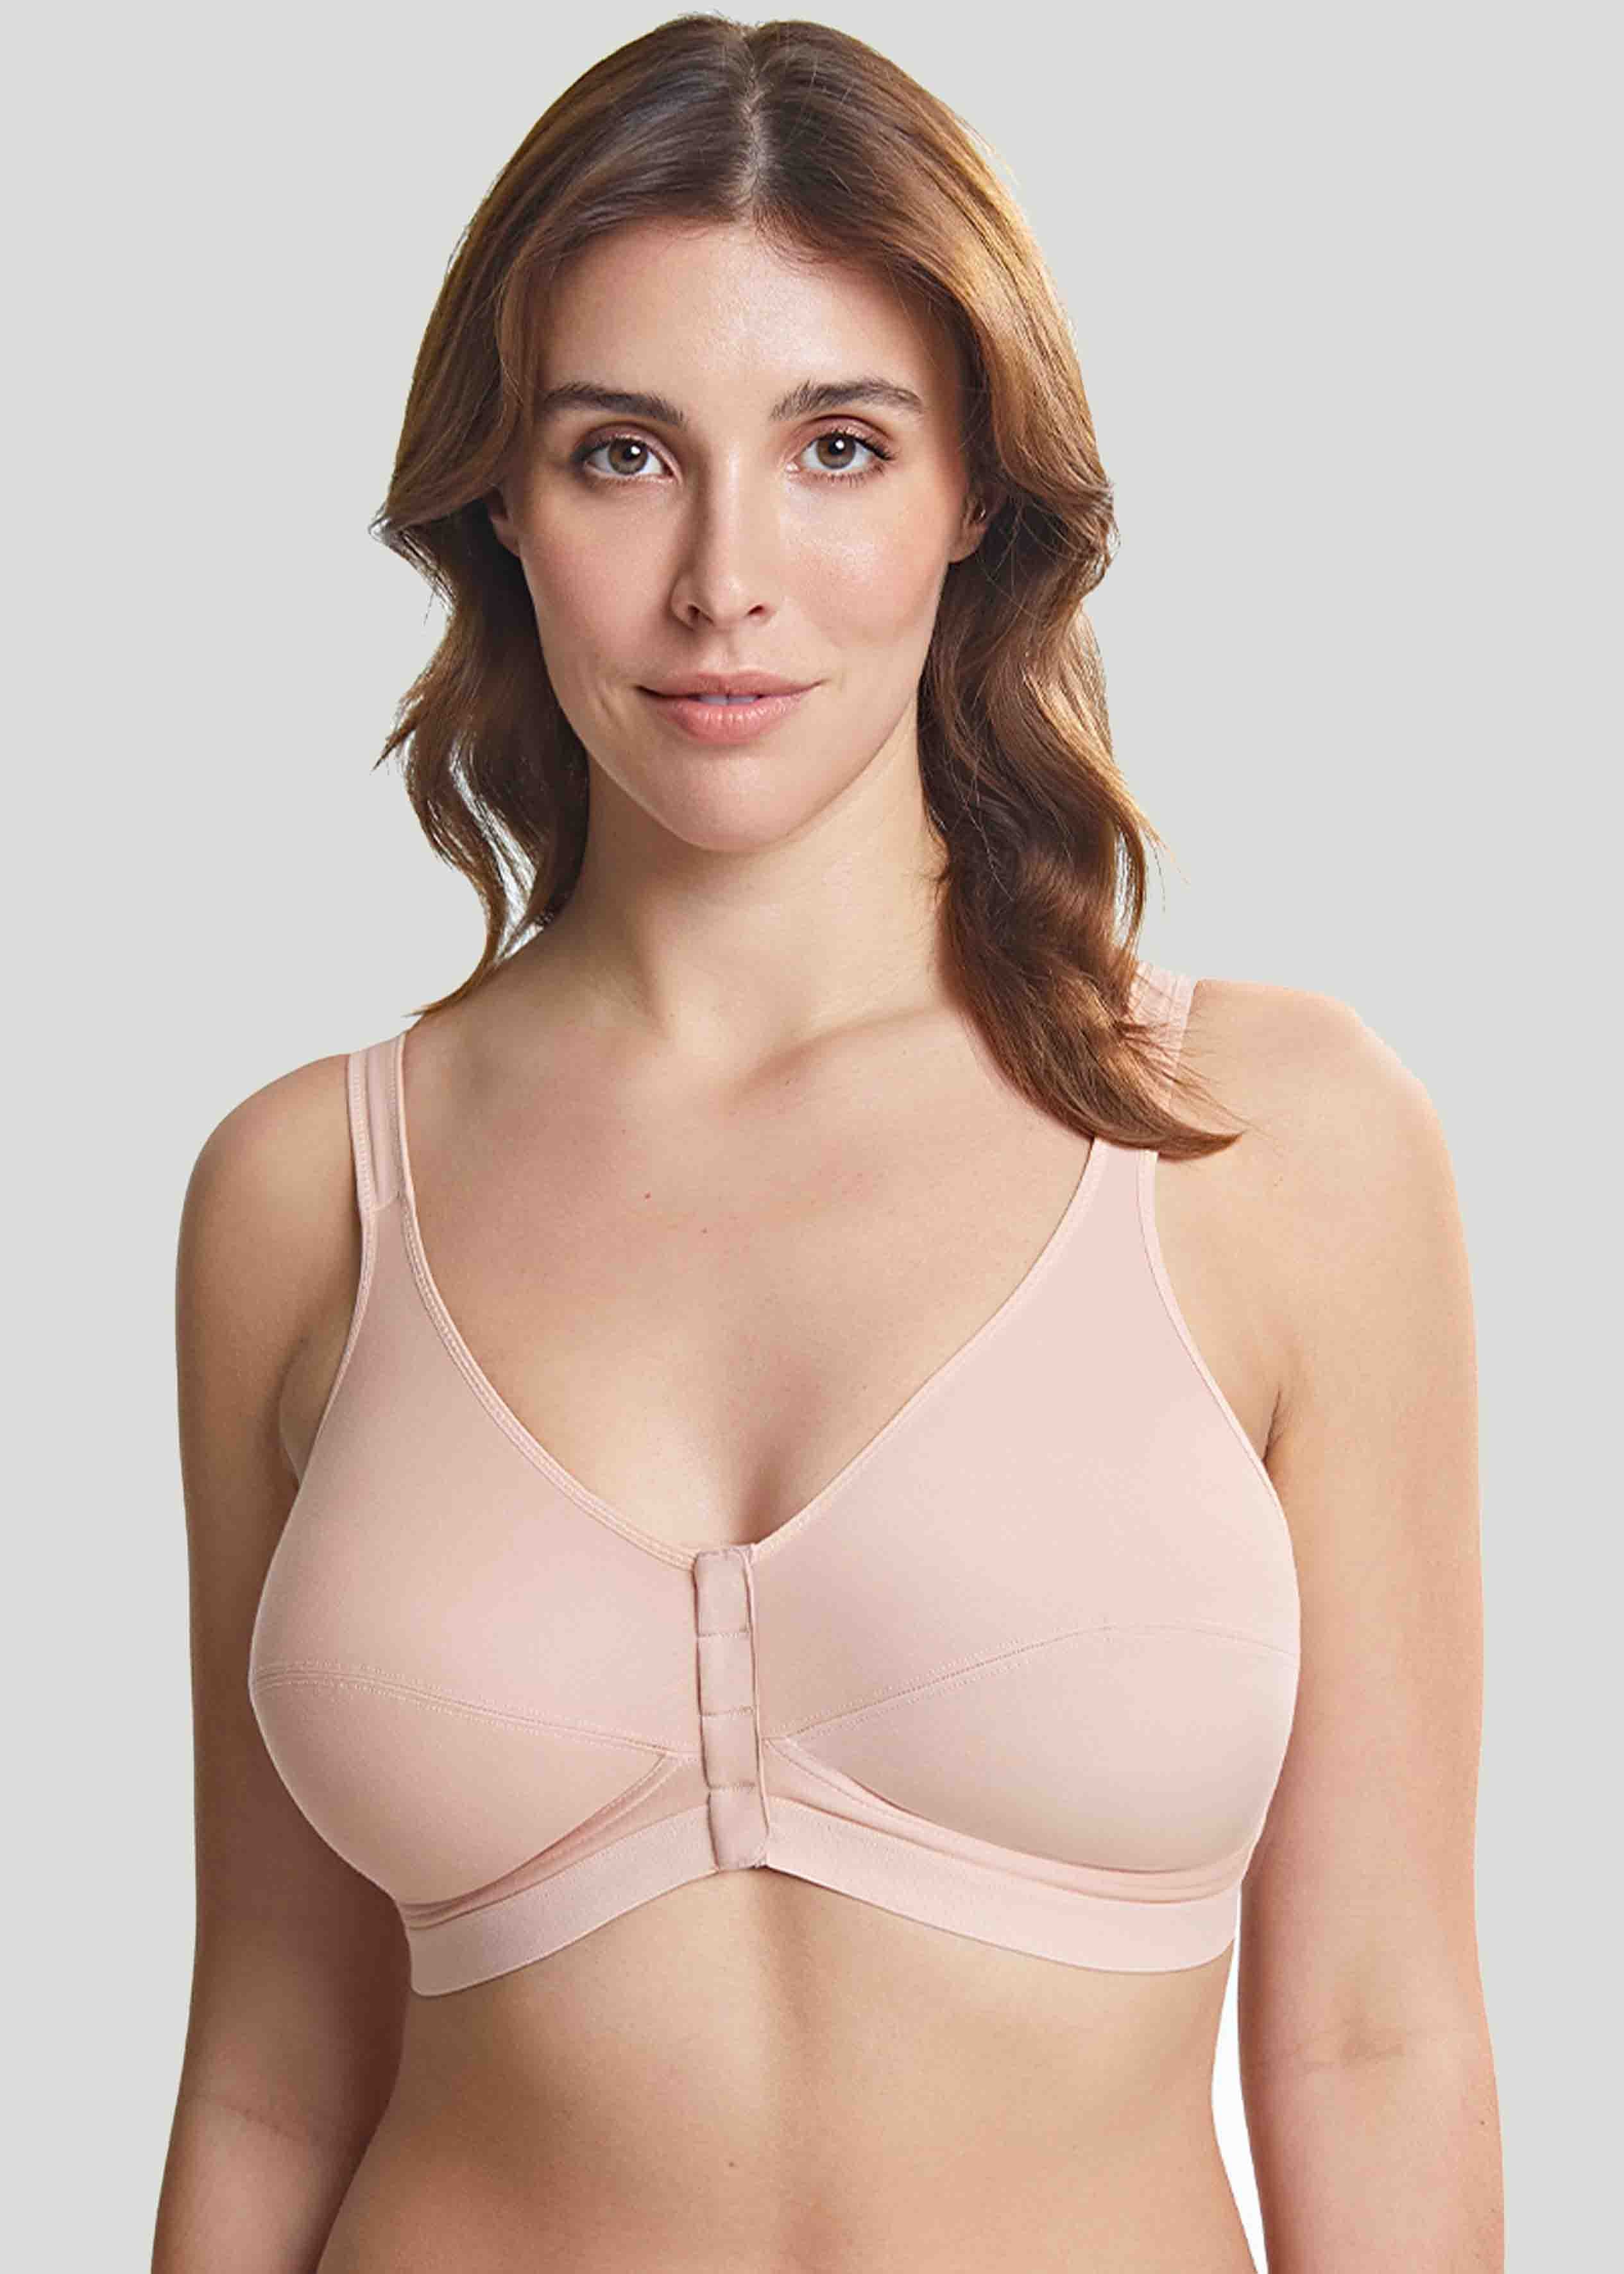 Front Fastening Bra with VELCRO Brand Fasteners